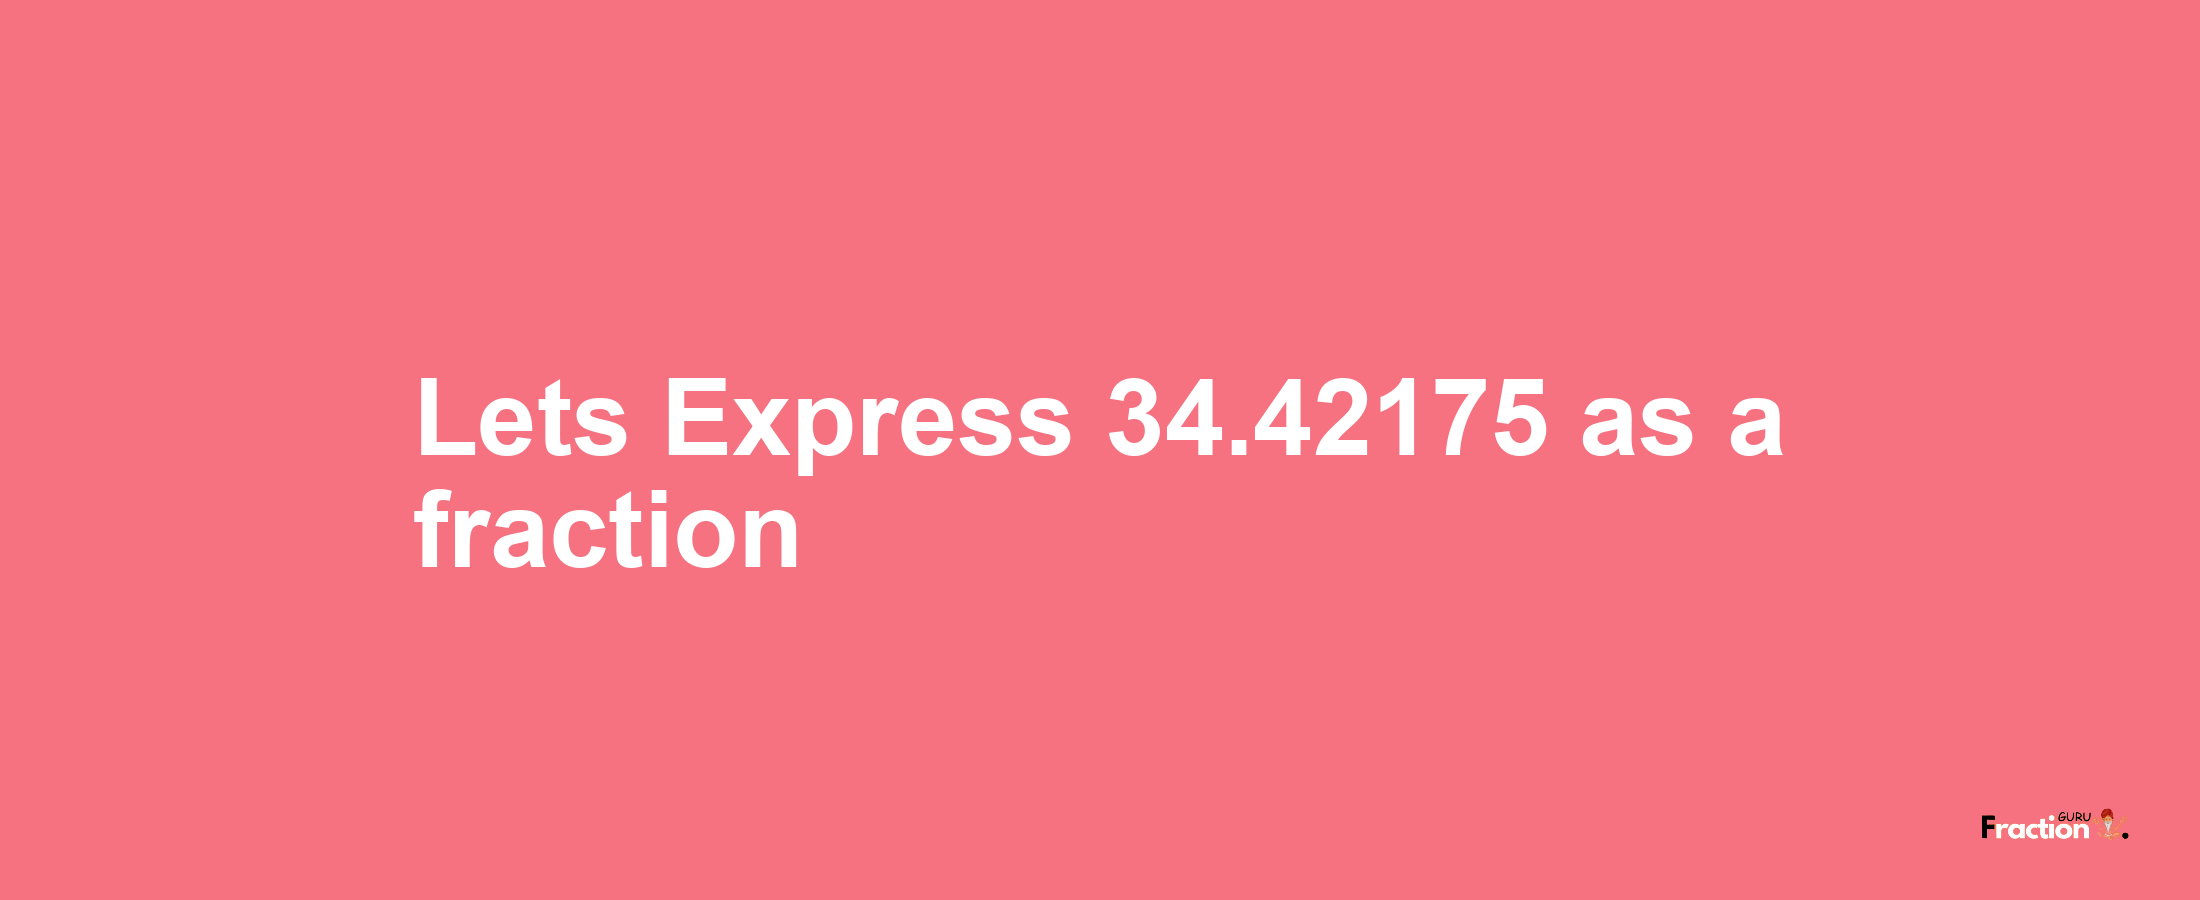 Lets Express 34.42175 as afraction